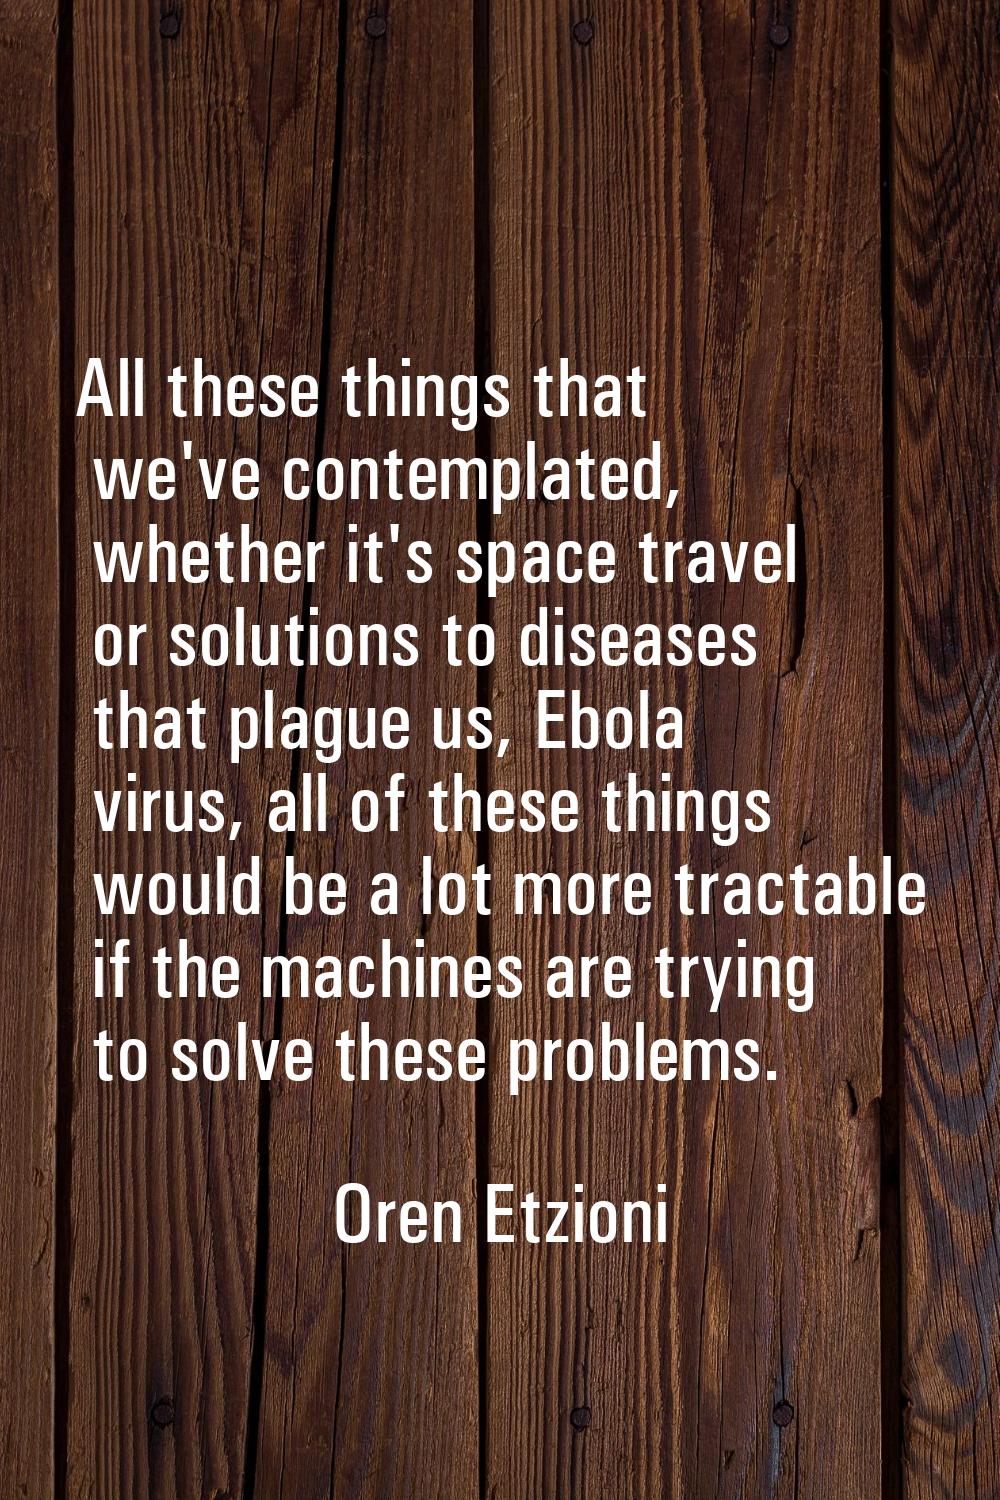 All these things that we've contemplated, whether it's space travel or solutions to diseases that p